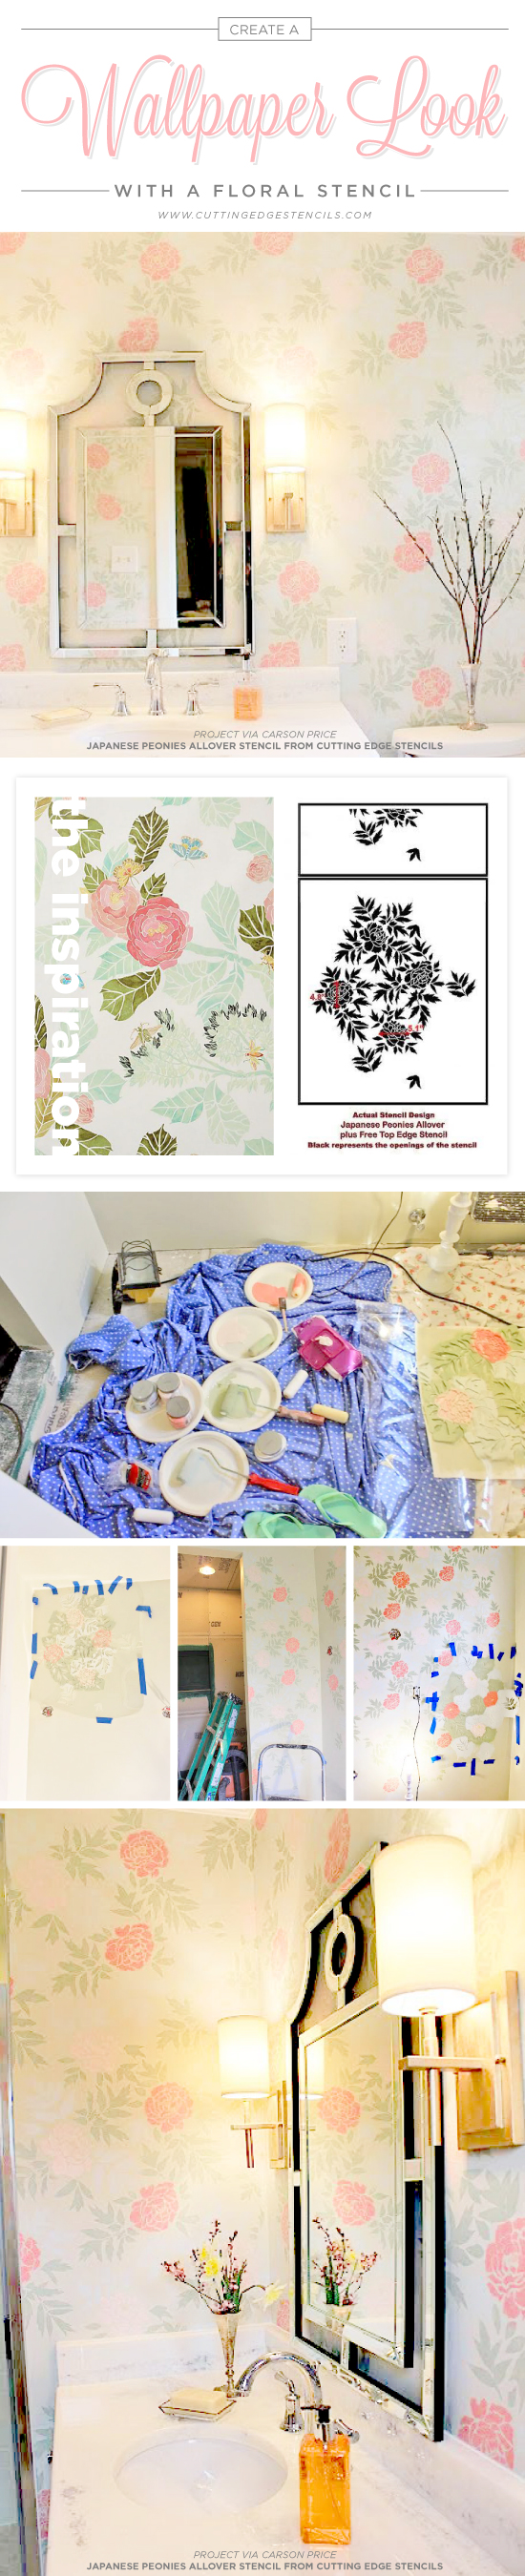 Cutting Edge Stencils shares a DIY stenciled bathroom using the Japanese Peonies Allover Stencil for a wallpaper look. http://www.cuttingedgestencils.com/japanese-peonies-floral-stencil-pattern.html